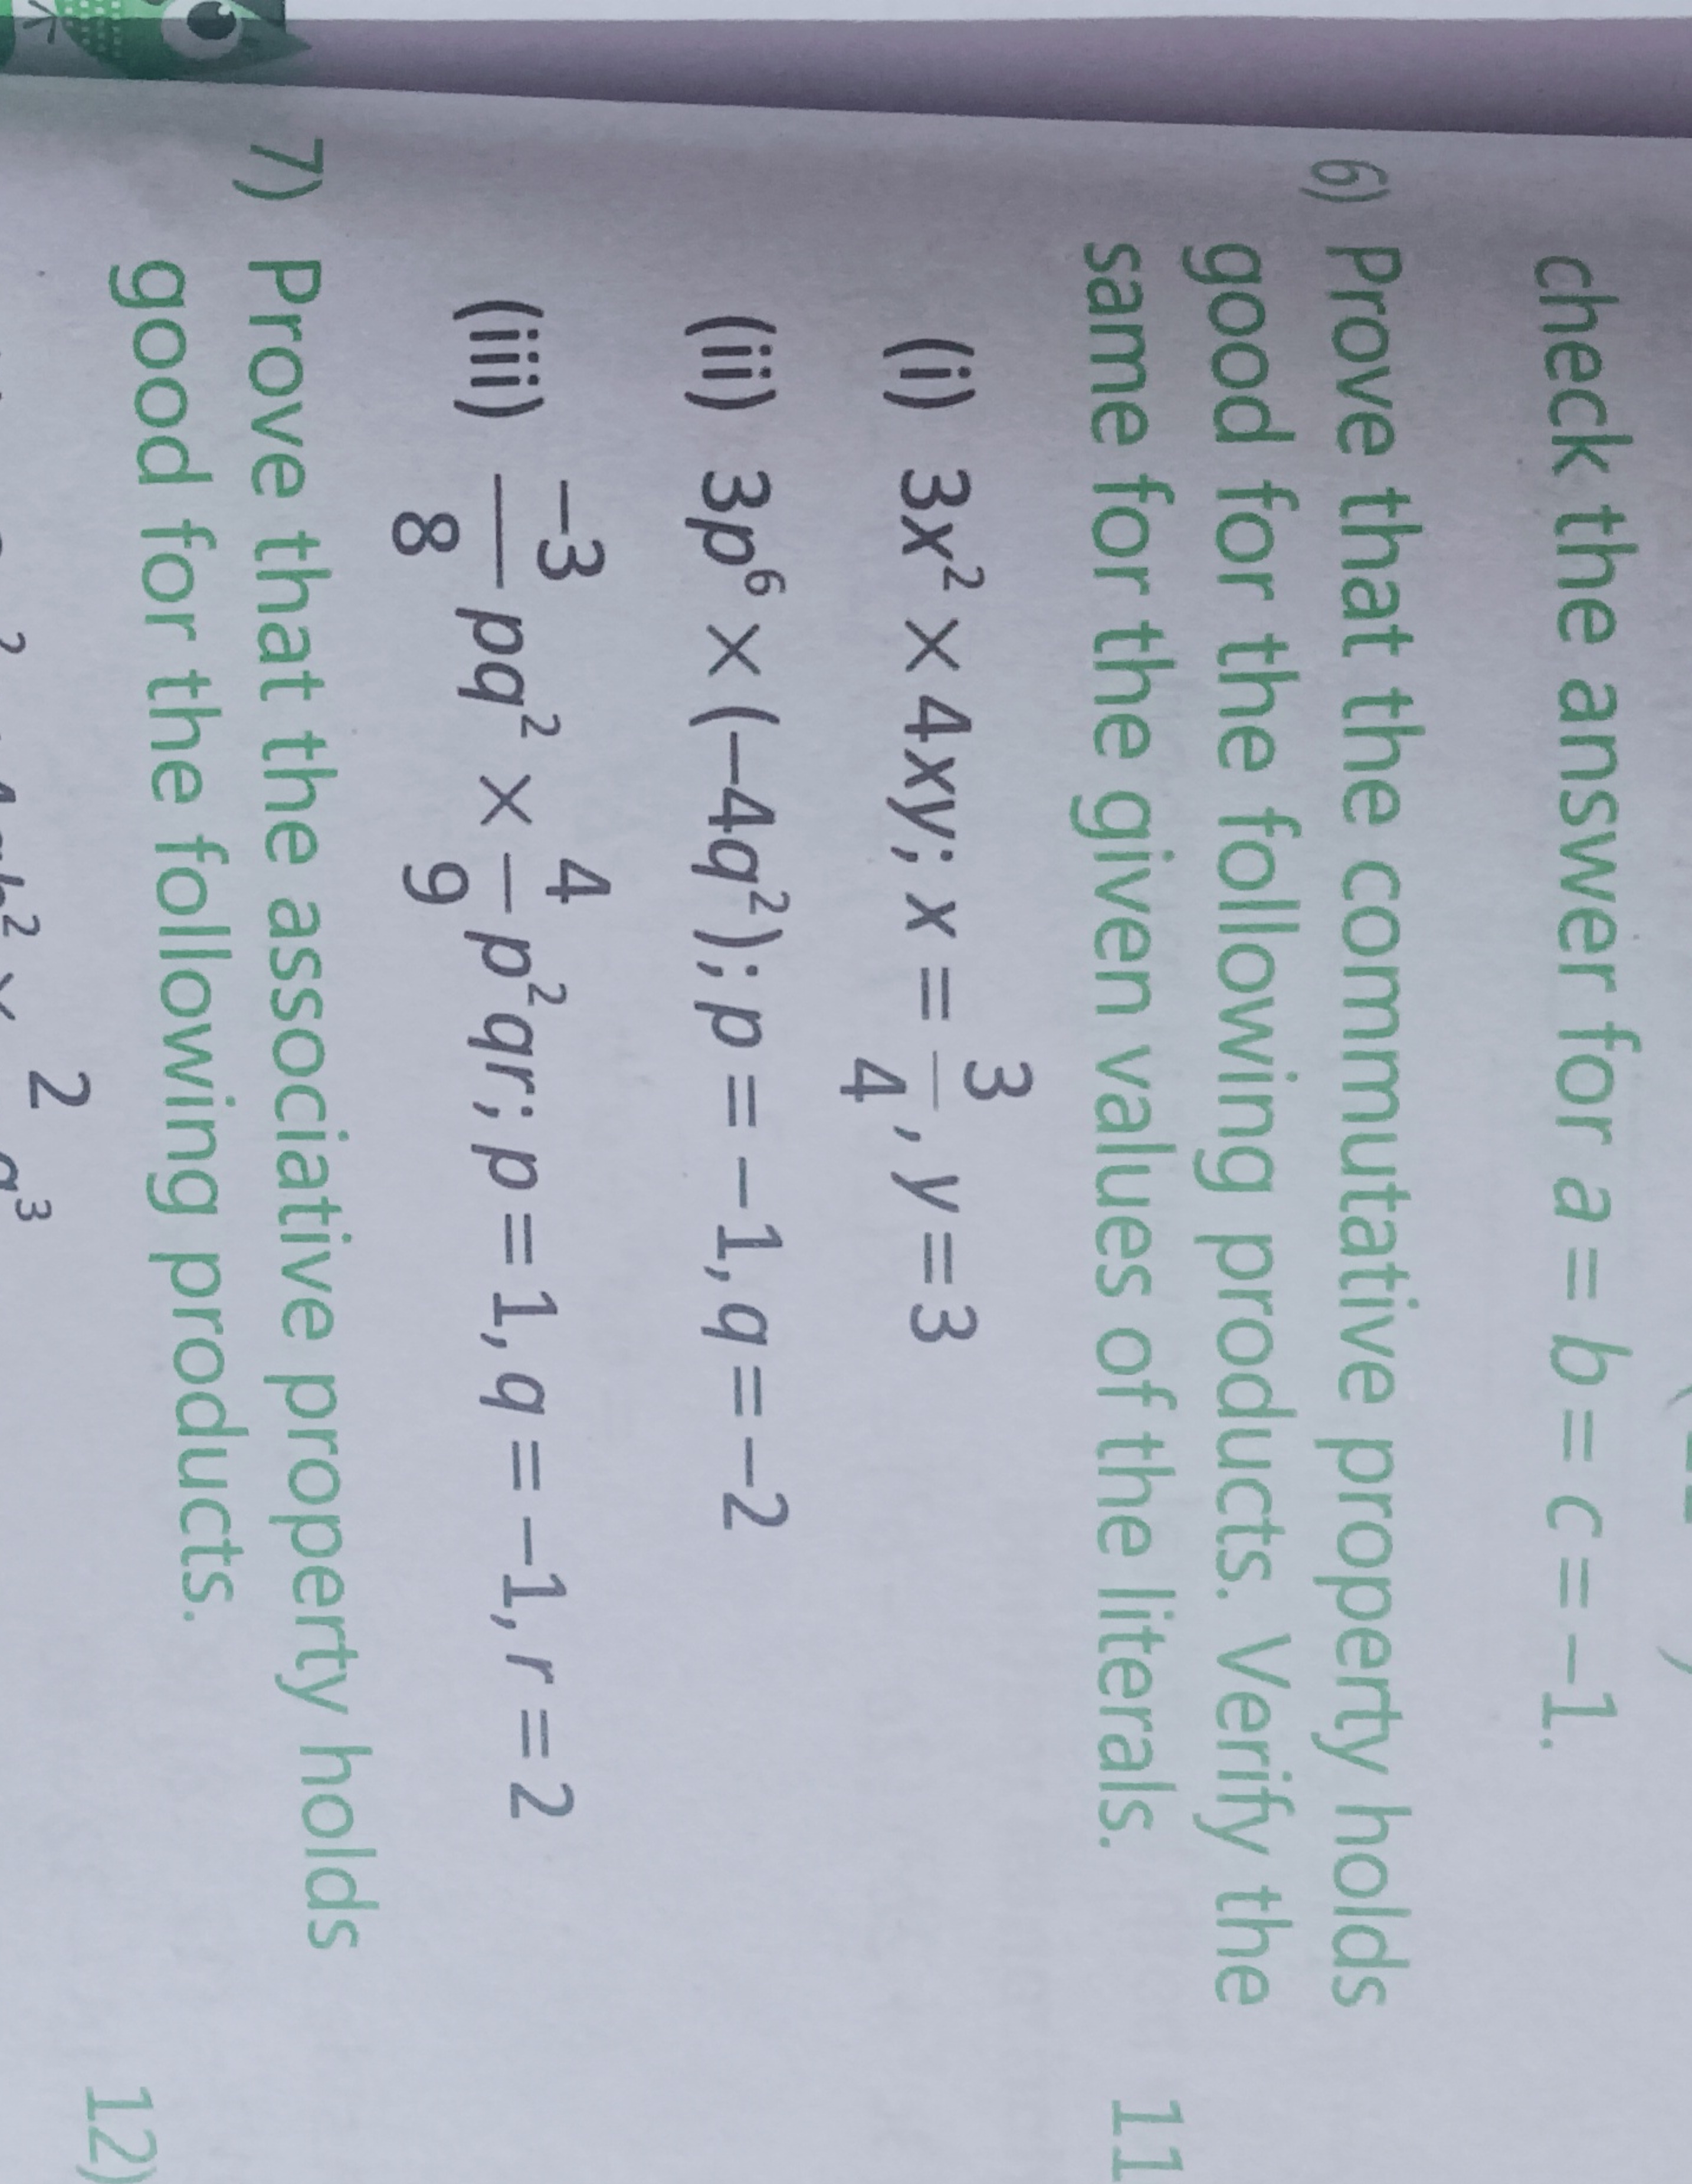 check the answer for a=b=c=−1.
6) Prove that the commutative property 